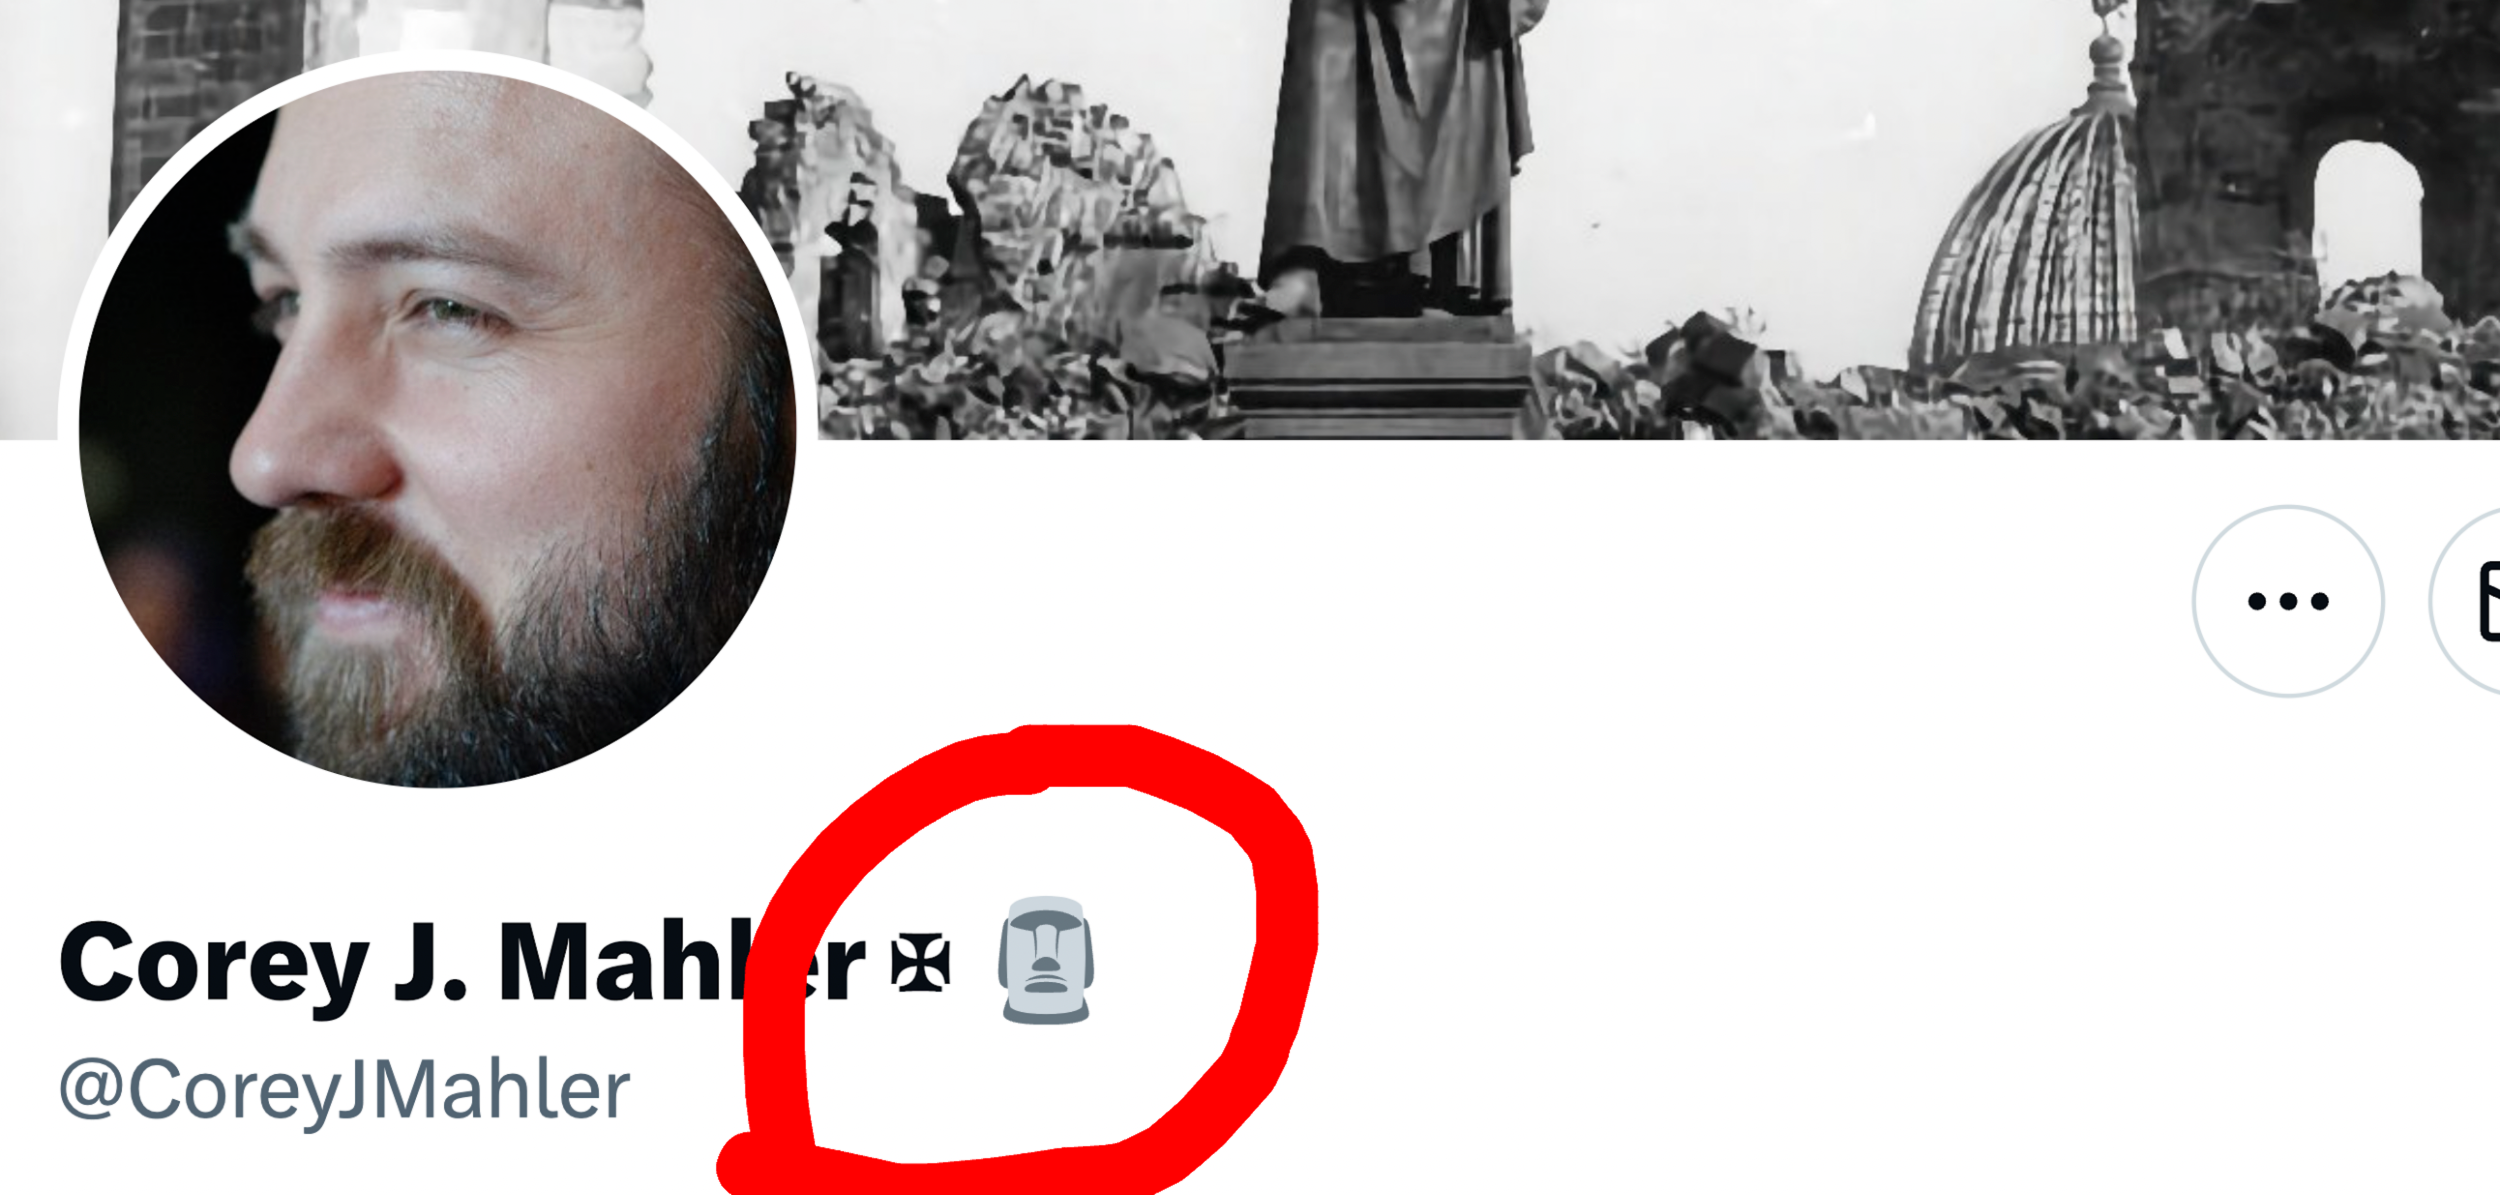 Closeup of Corey Mahler's twitter page, where you can see the SC "Easter Island" logo next to his use of the Iron Cross.